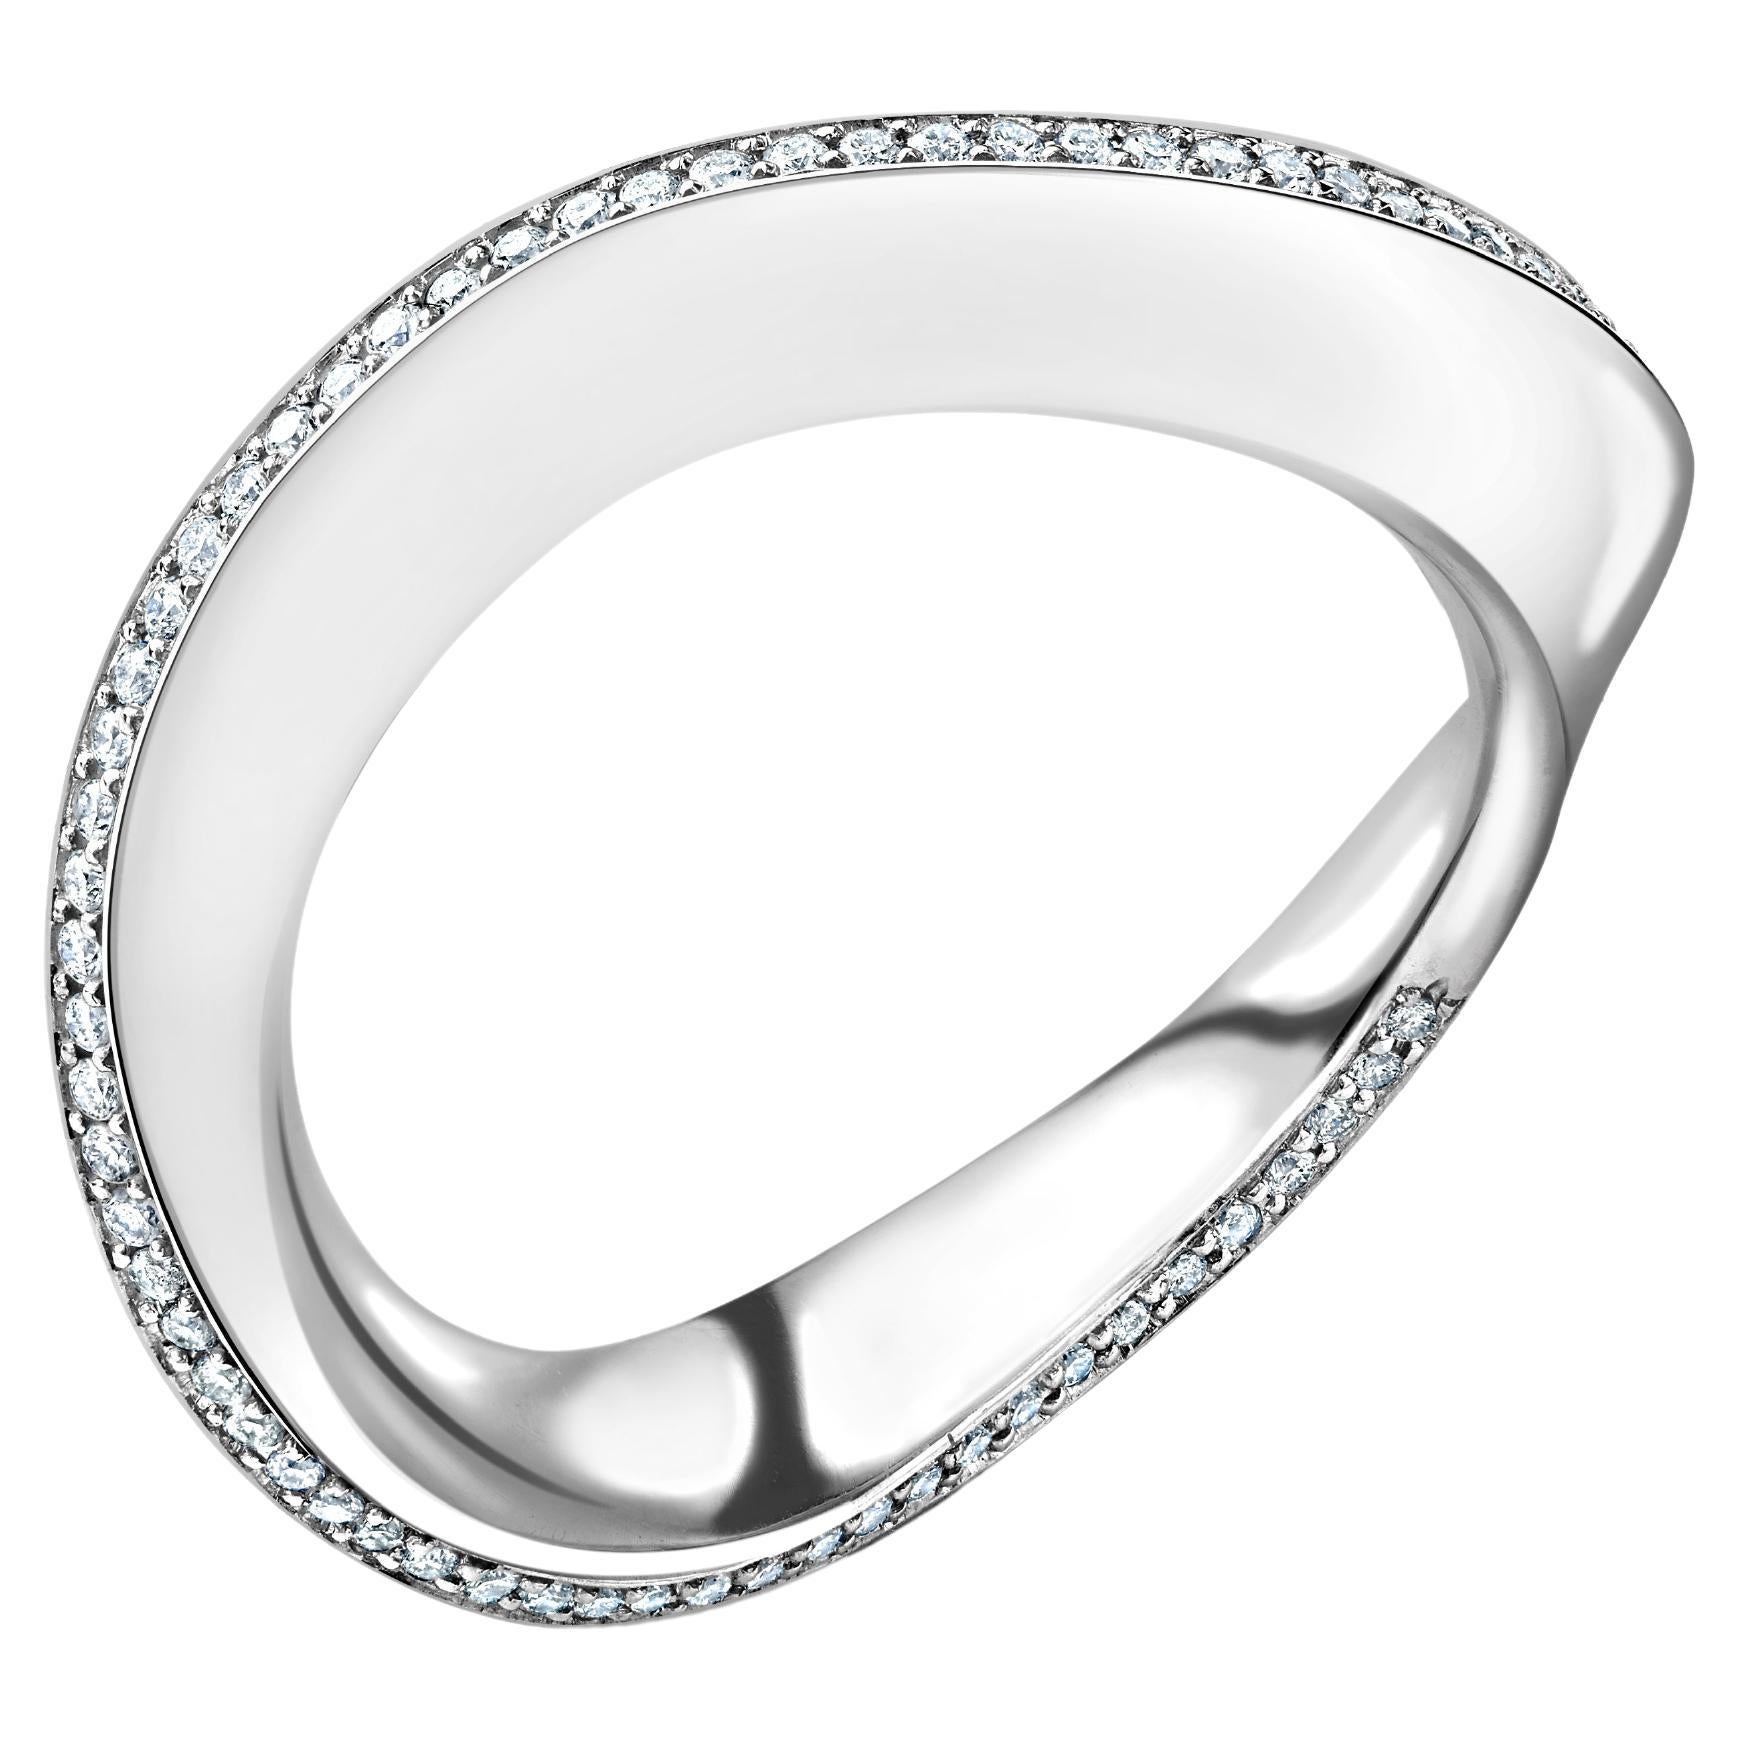 For Sale:  SCHIUMA RING White gold with a white diamond edge by Liv Luttrell